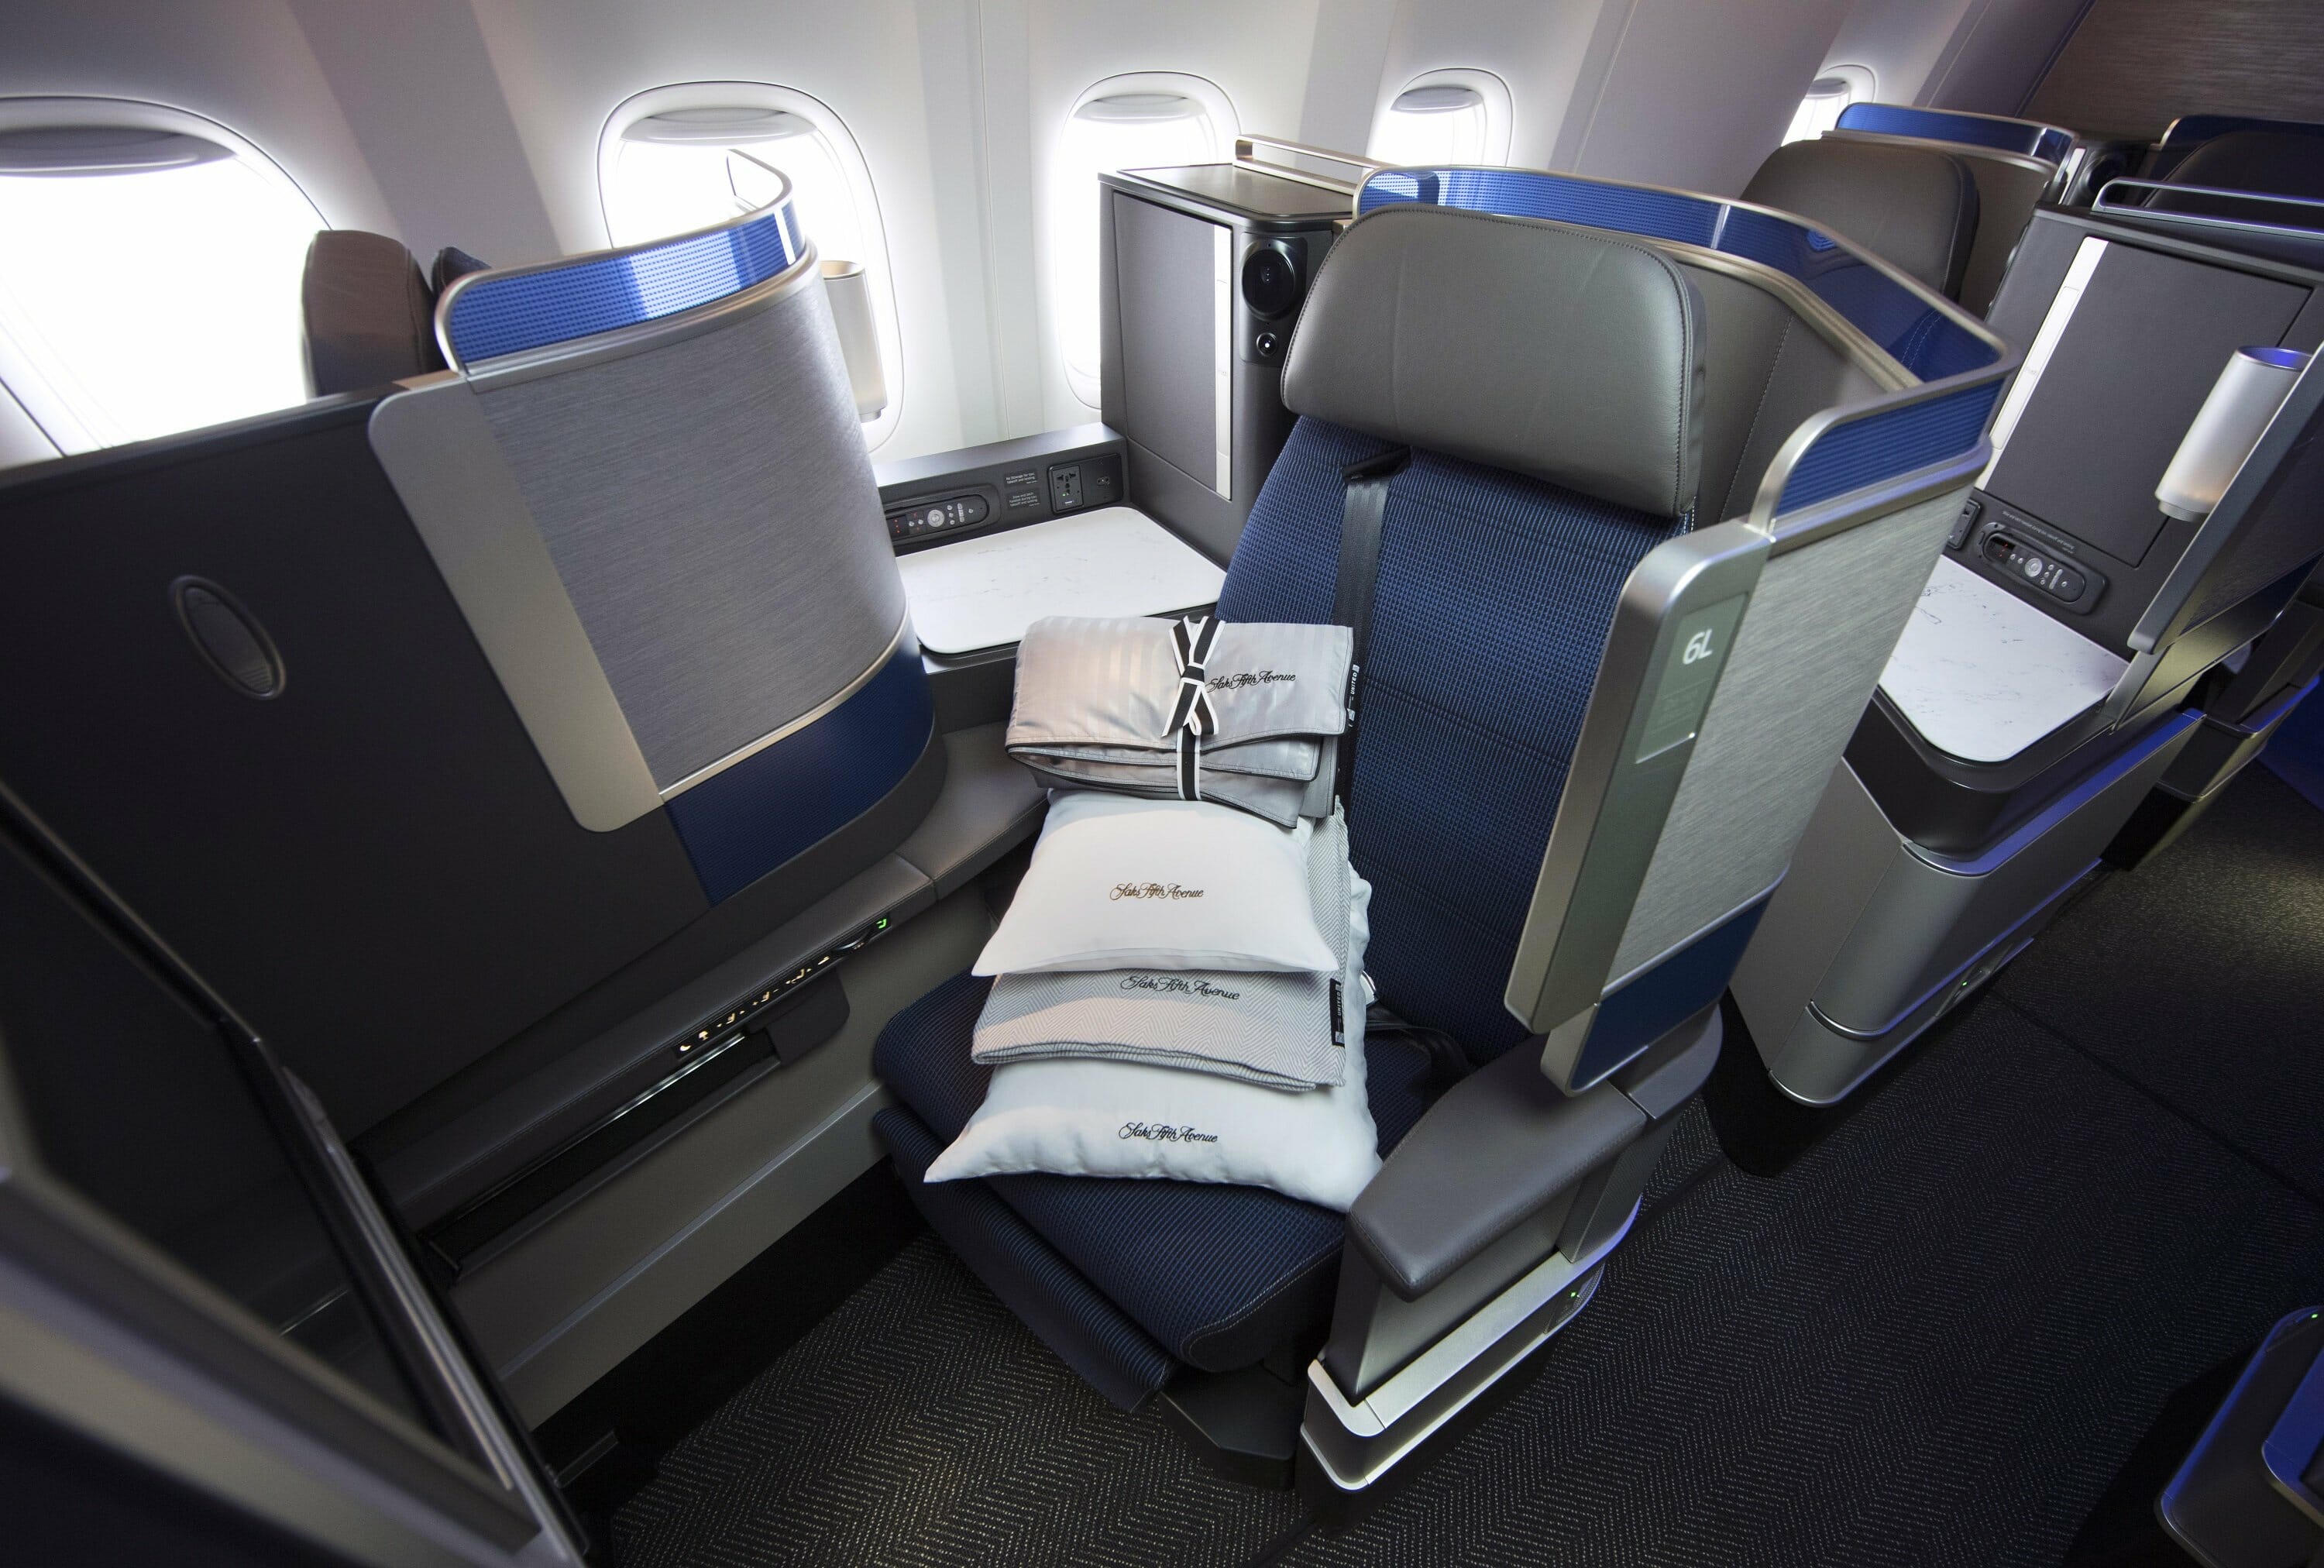 United Adds More Than 1 600 New Premium Seats To International Domestic And Regional Aircraft More Comfort For More Customers In The Skies Aero Crew News